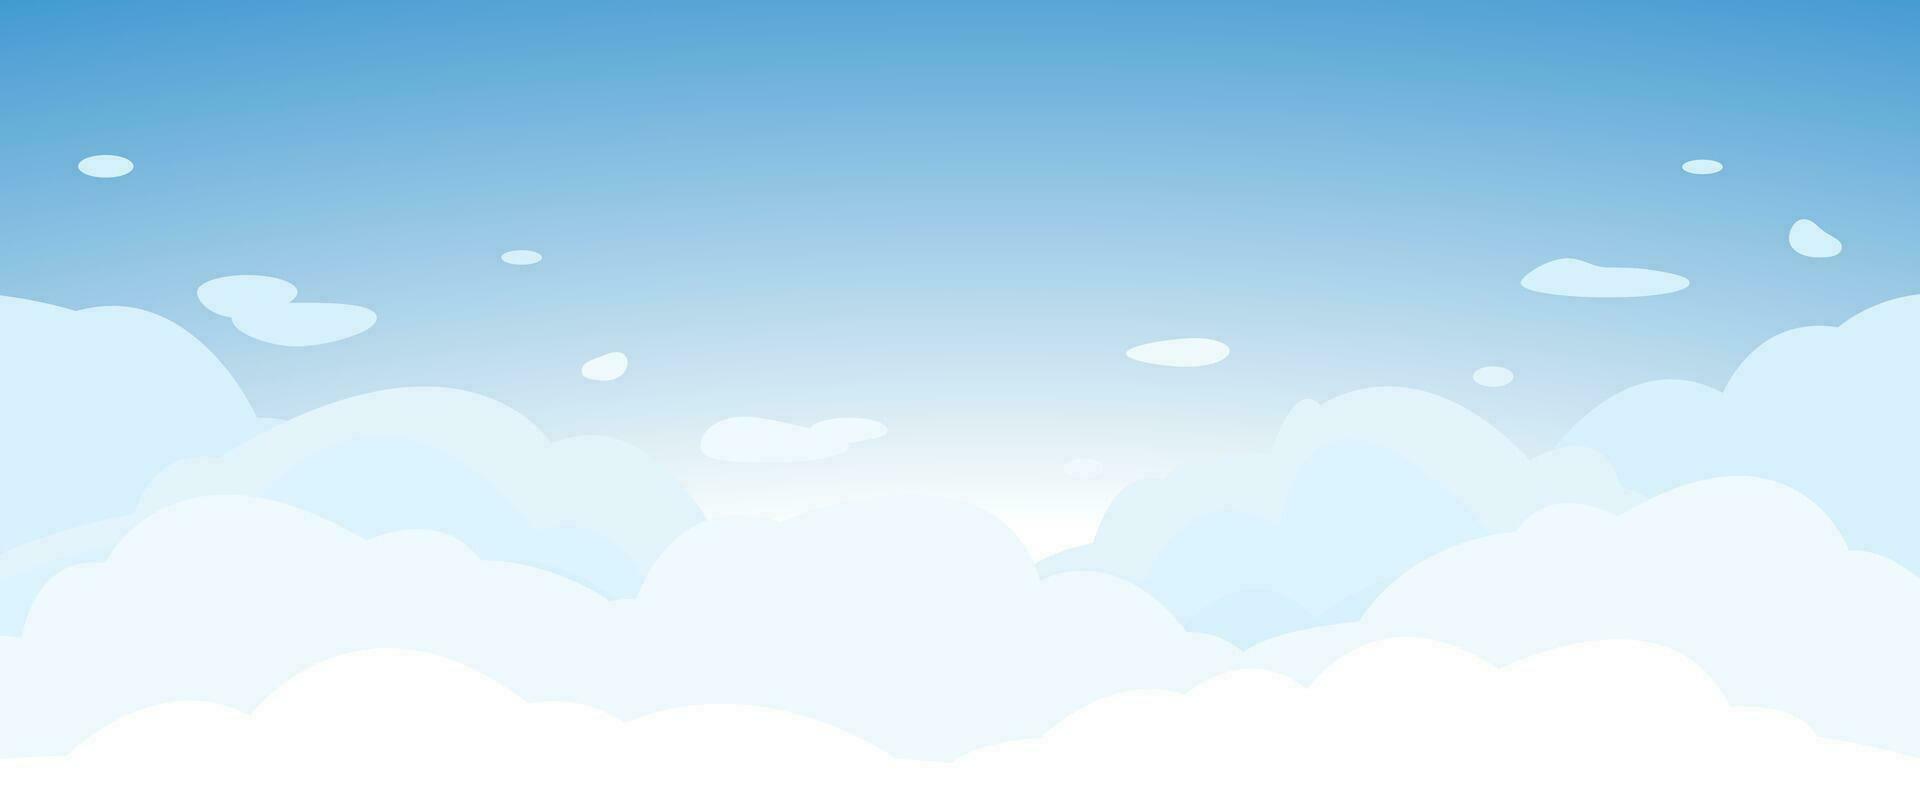 Blue sky background with clouds. Vector illustration for cover, banner, poster, web and packaging.